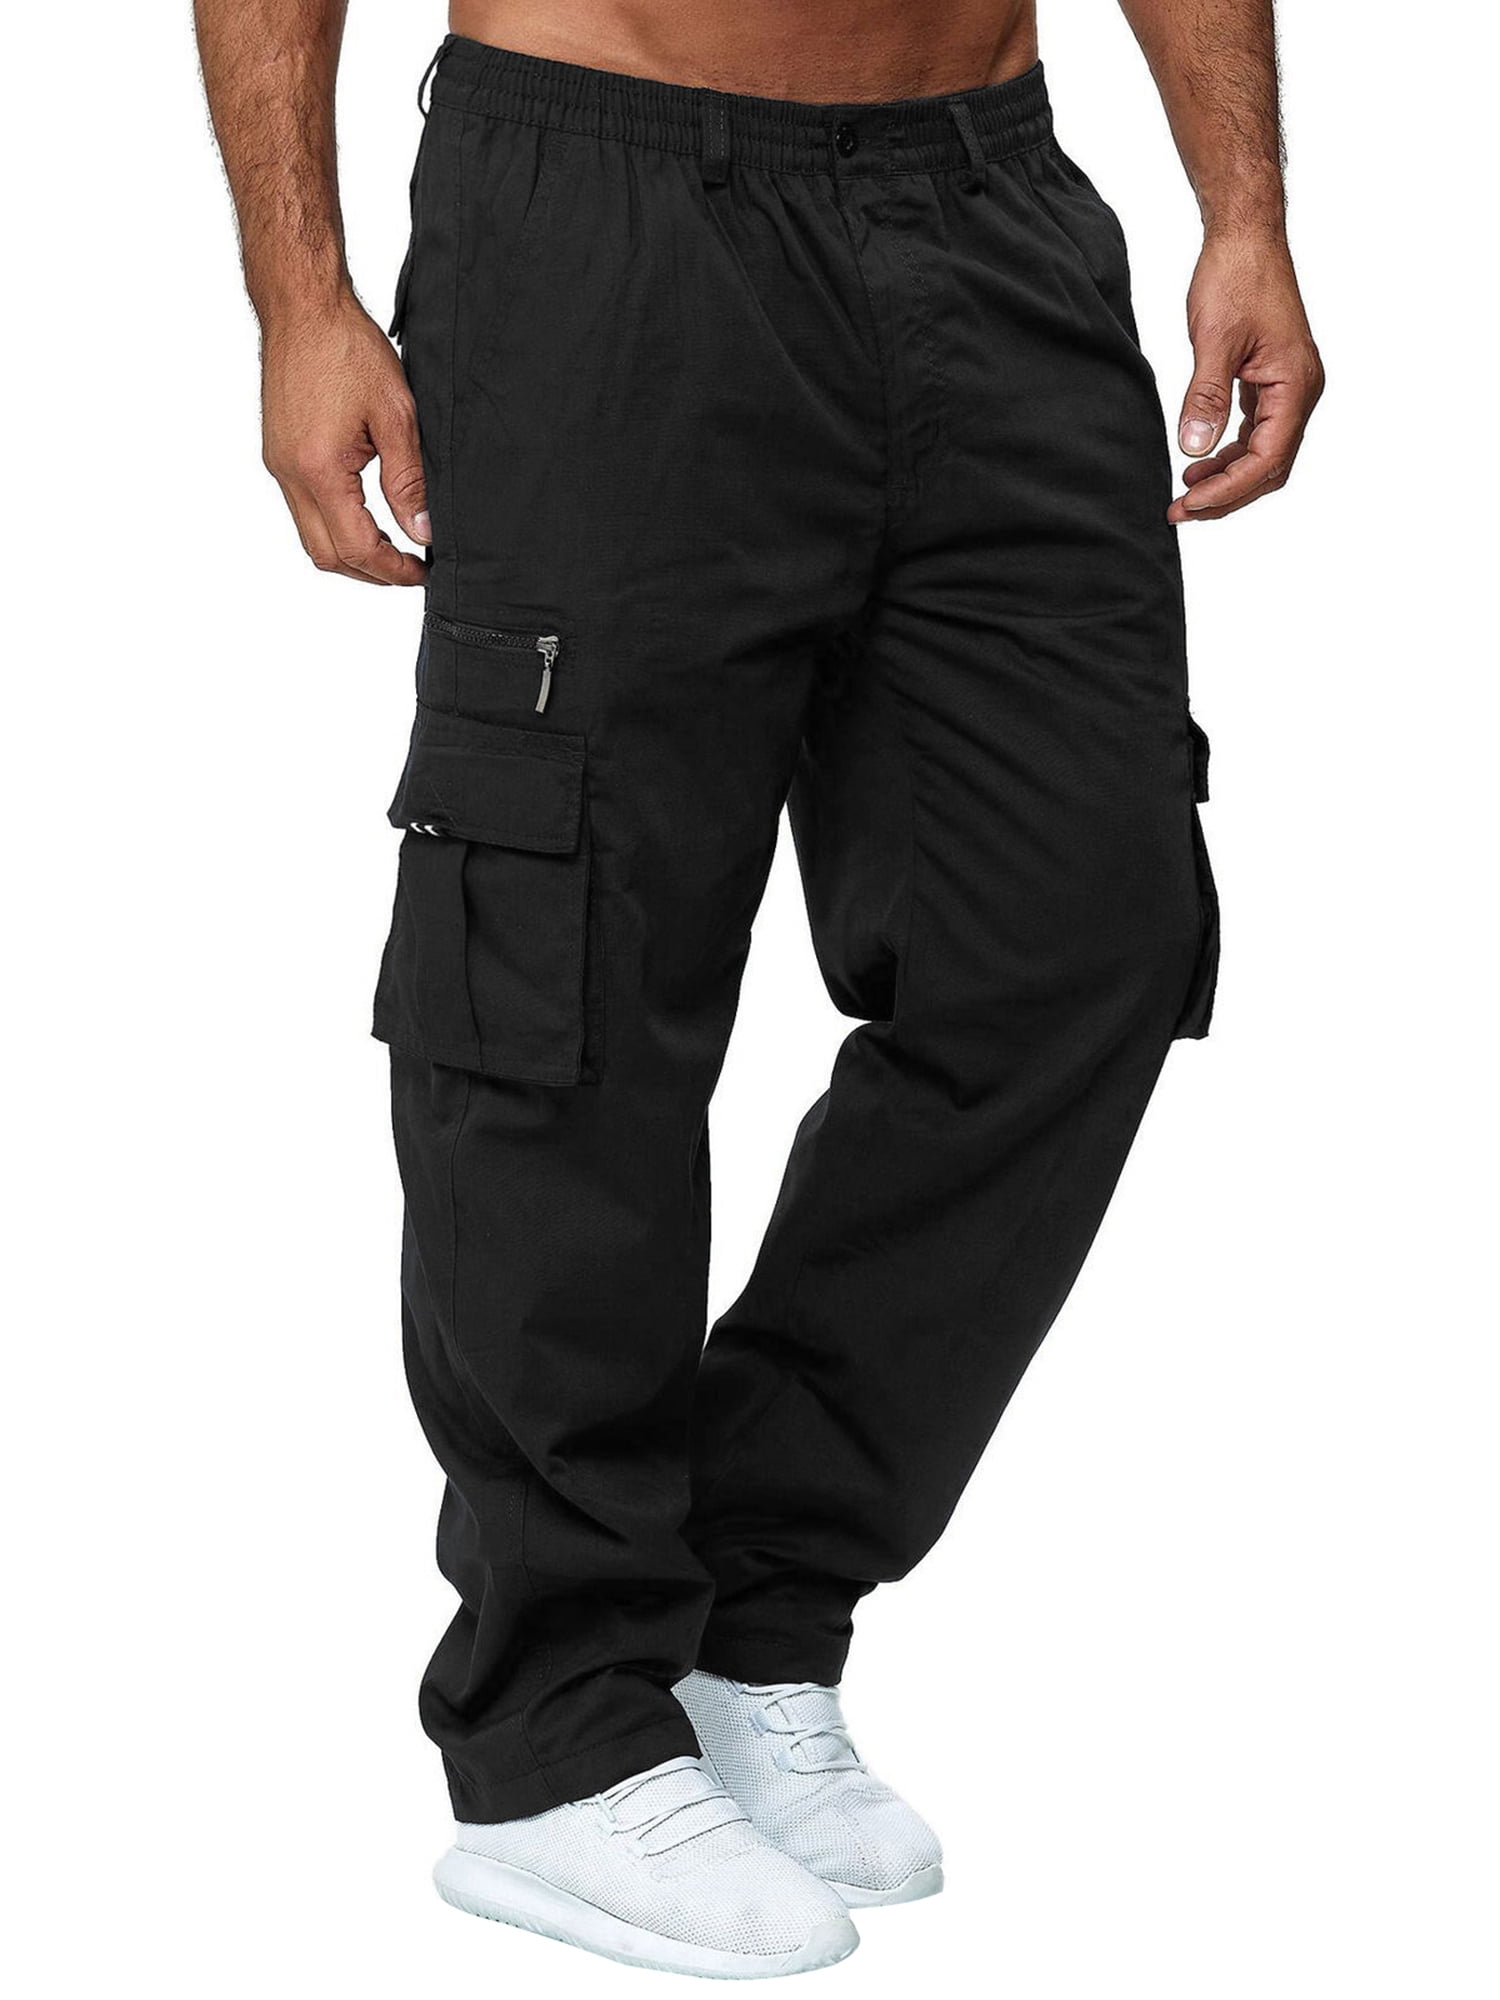 Sunisery Men's Casual Pants Stretch Waist Straight Fit Relaxed Cargo Pants  Sports Trousers